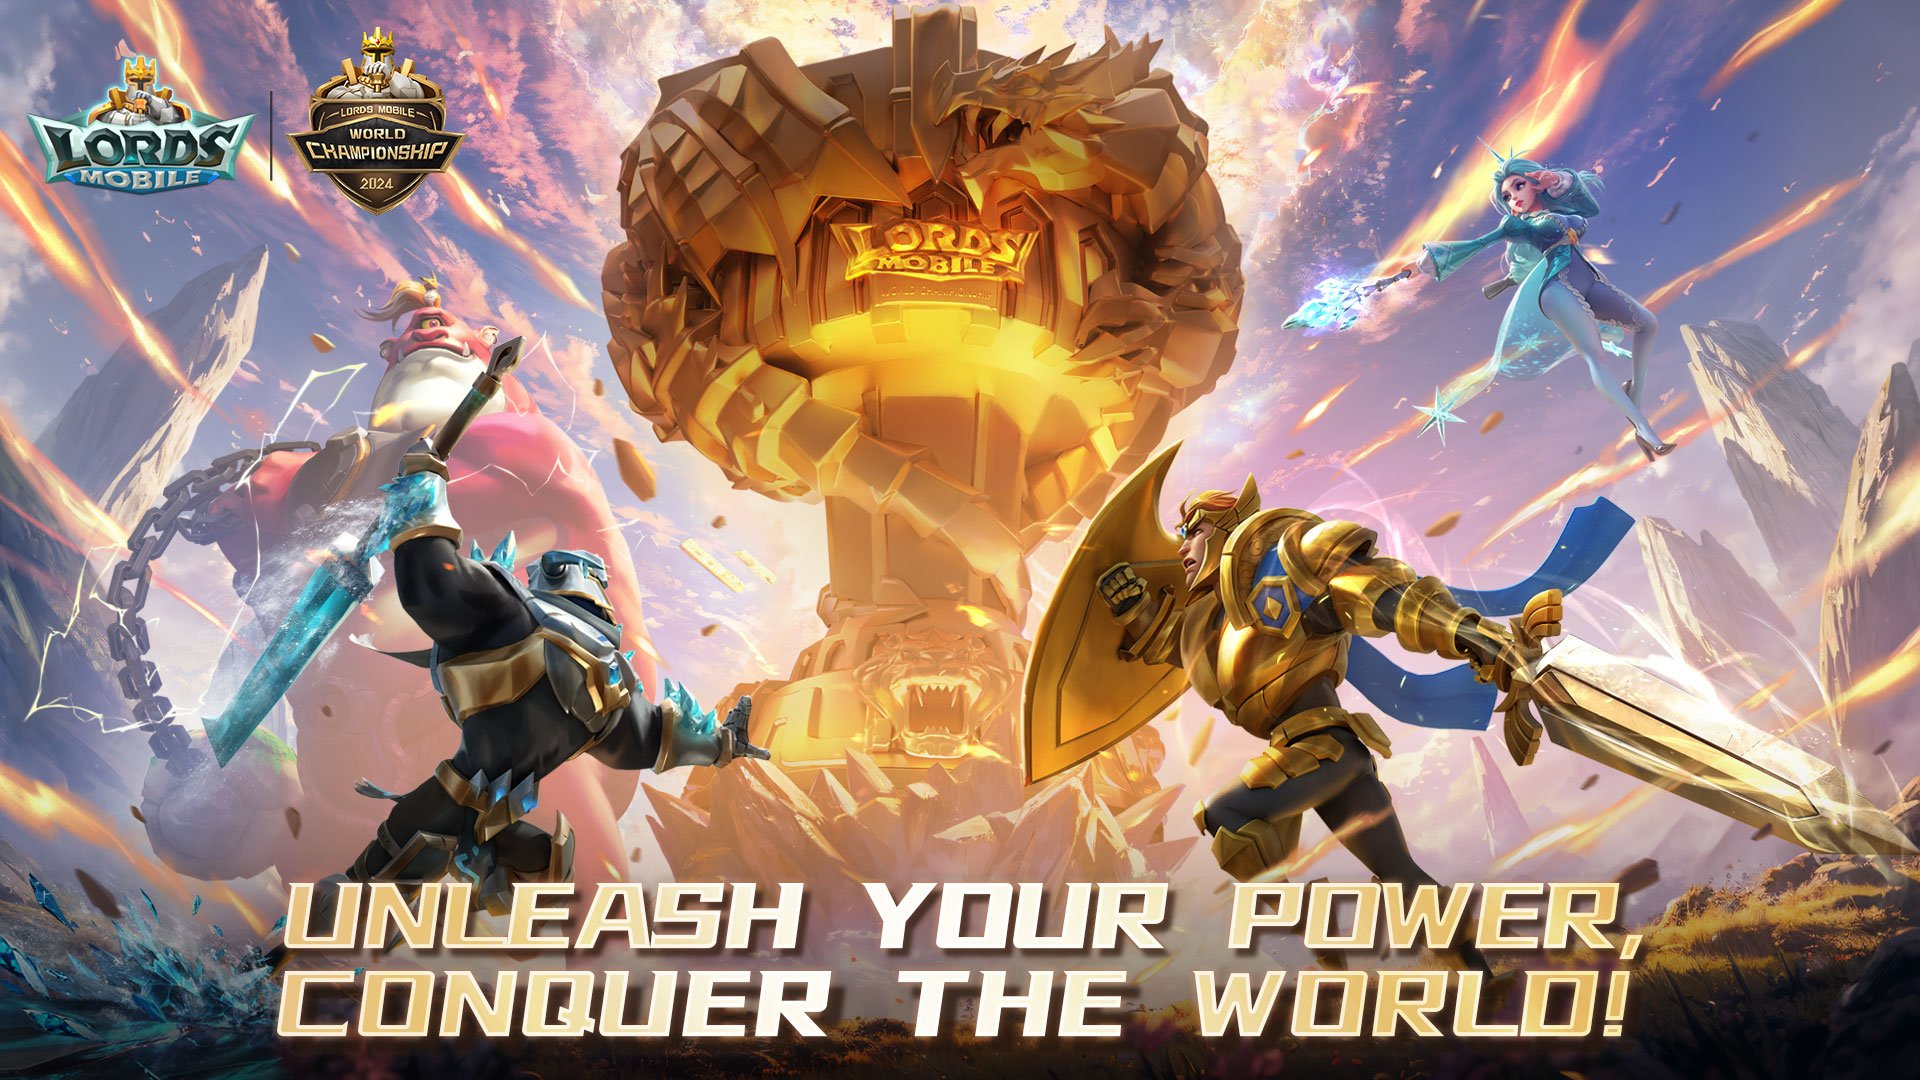 Lords Mobile World Championship Opens for Pre-registrations, Epic Prizes To Be Won